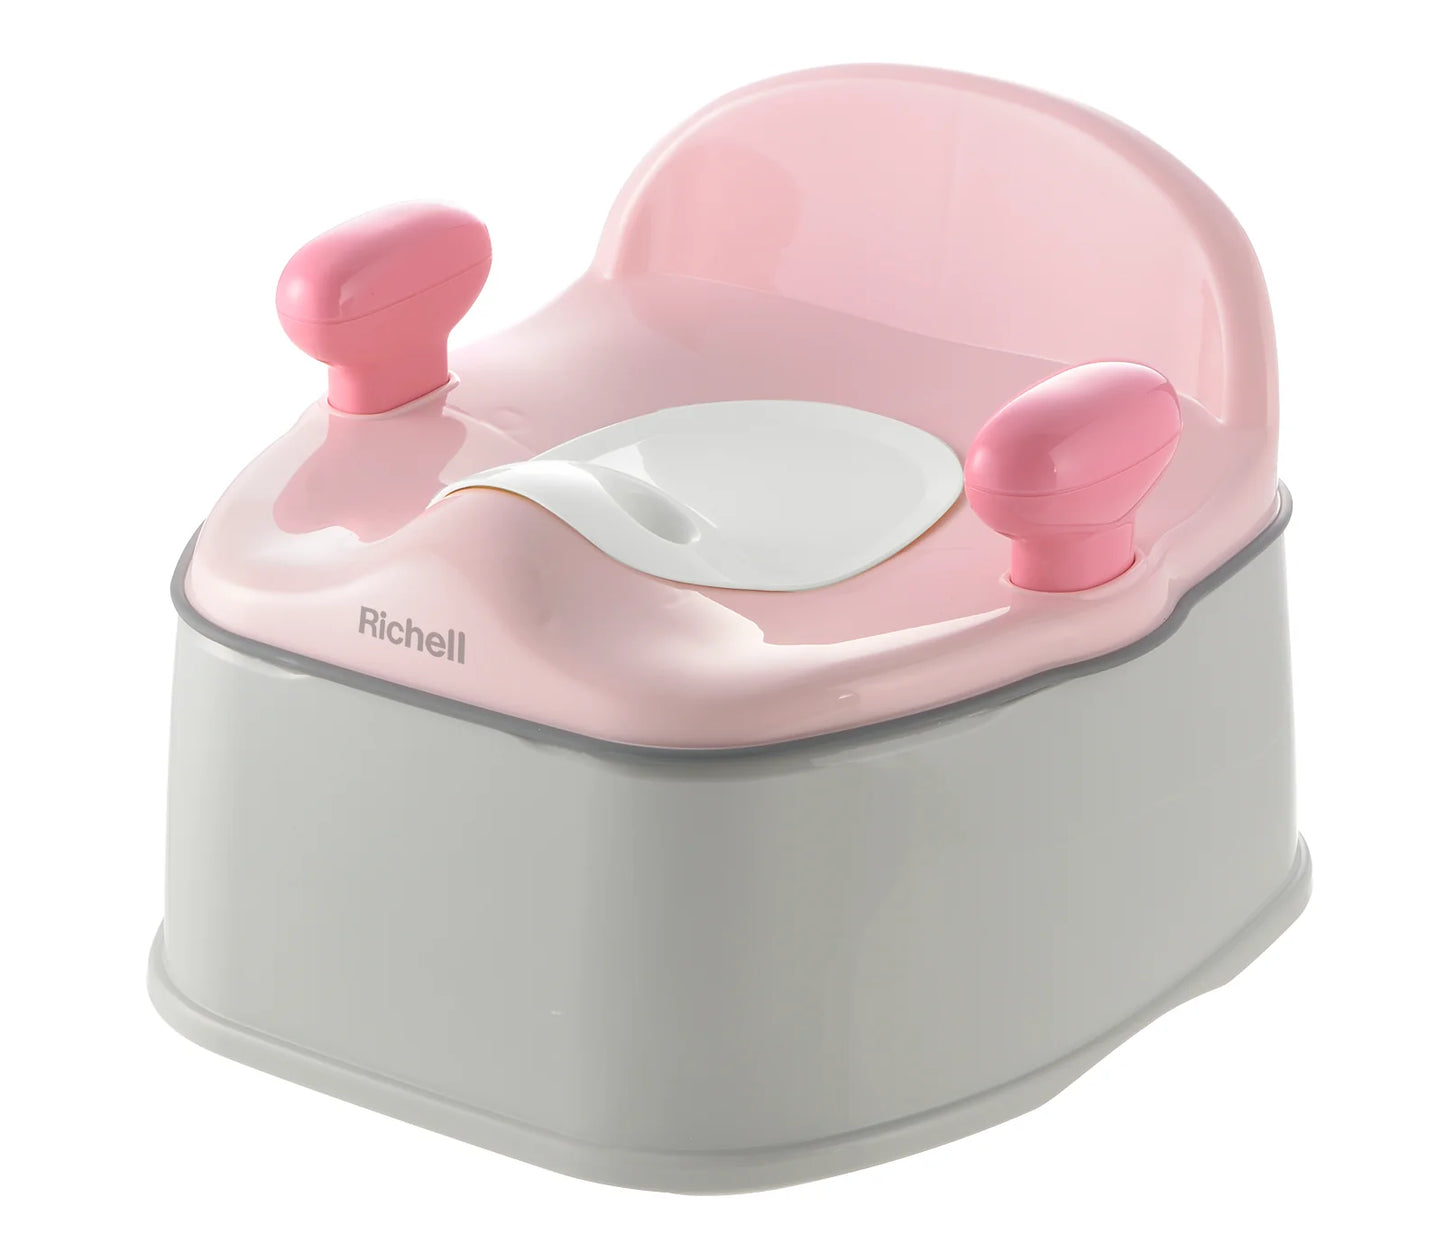 Richell Pottis Step & Potty Training Toilet Seat for Toddler and Kids (12Mos+) With Armrest